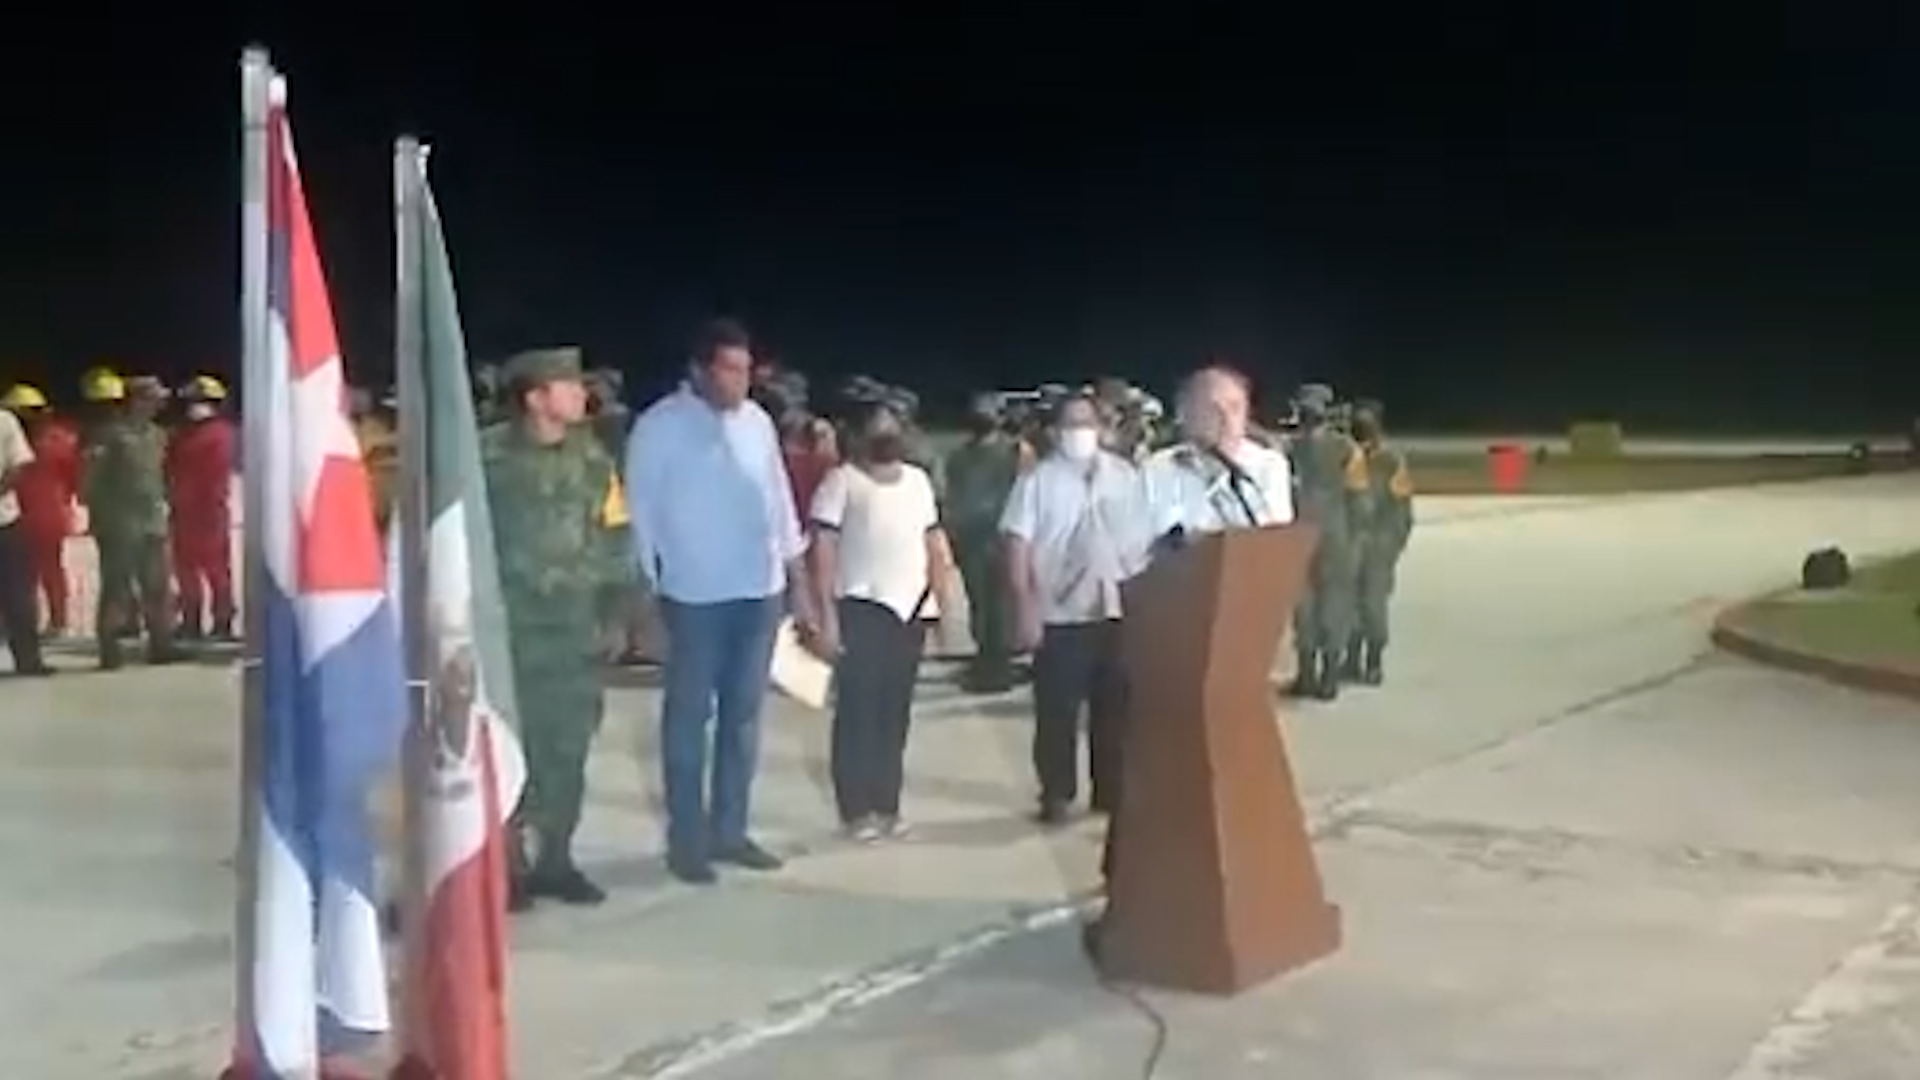 Aid from Mexico arrives in Cuba after fire in Matanzas (Screenshot)